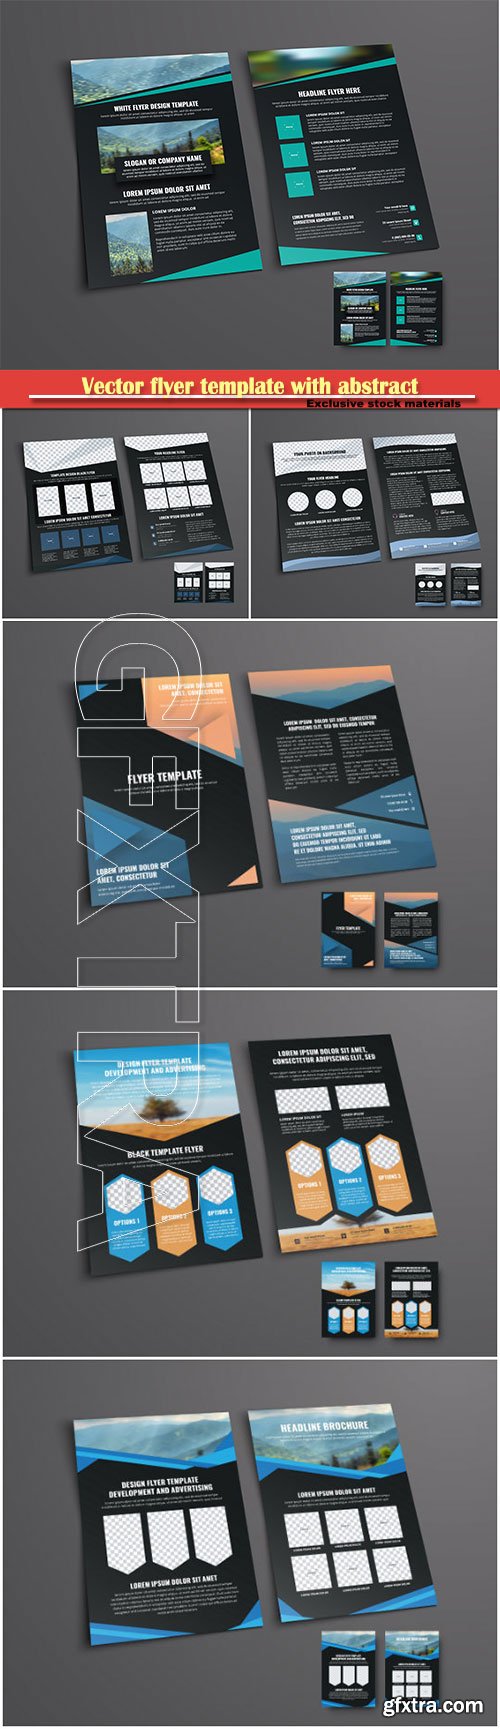 Vector flyer template with abstract geometric shapes for a photo